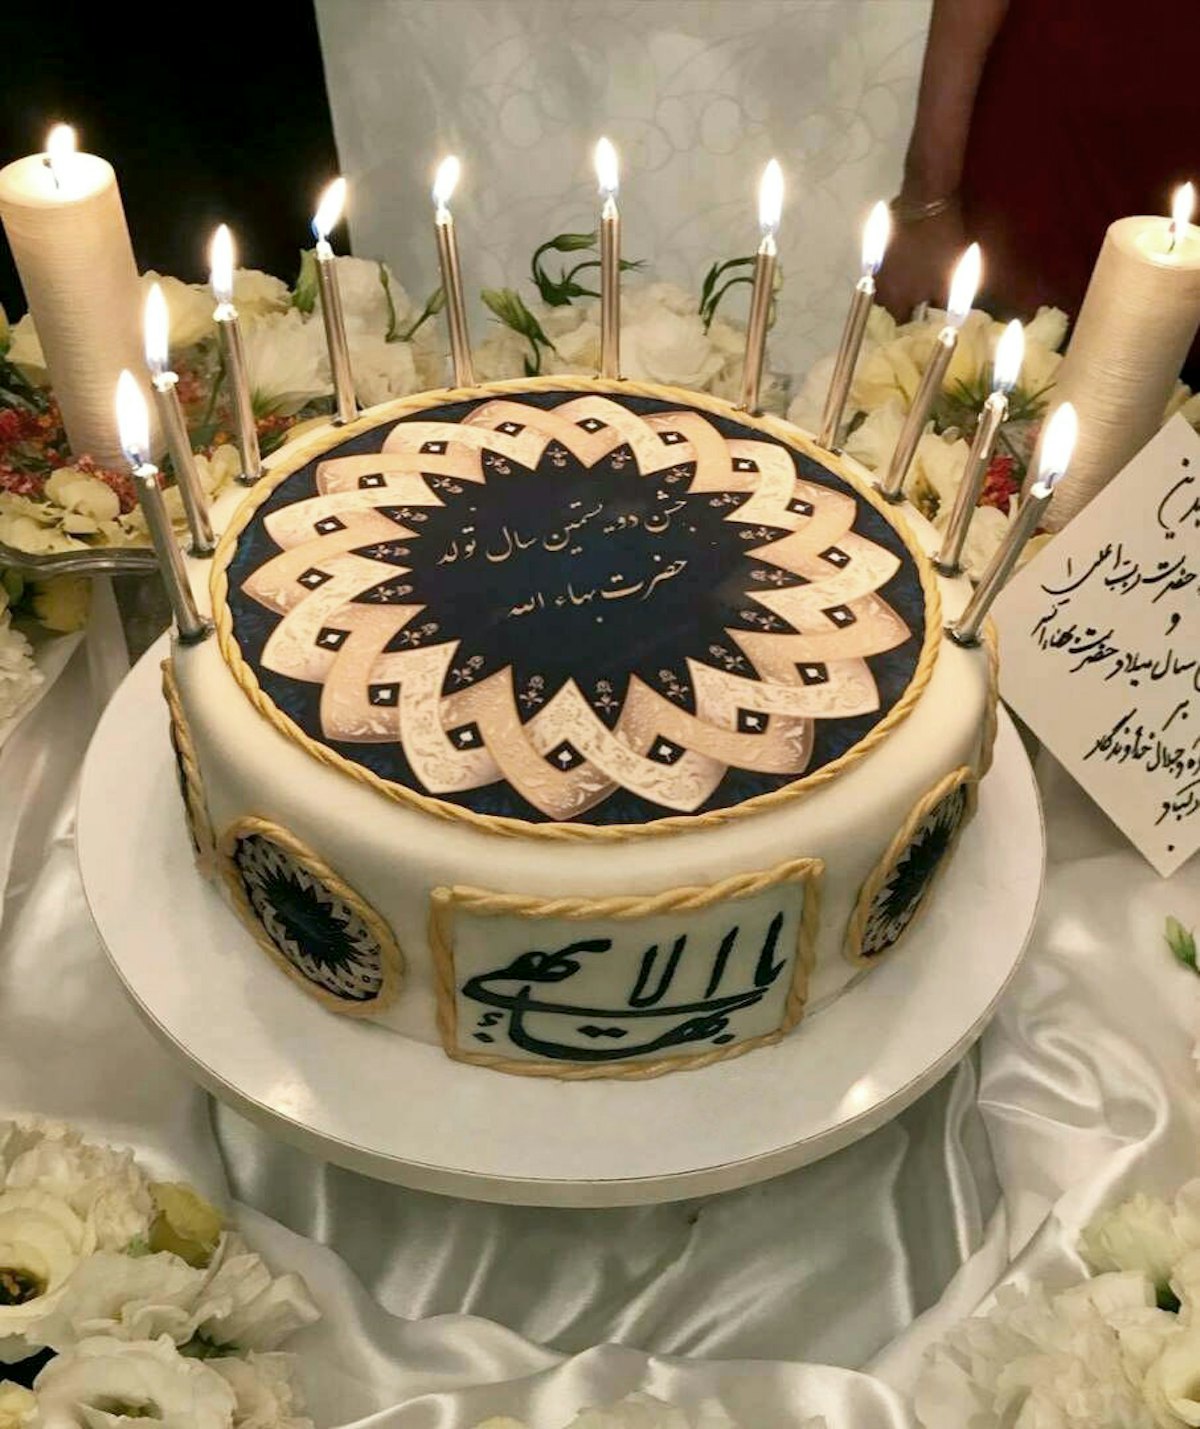 A beautifully decorated cake offered as a gift from a Muslim family in Iran to their Baha’i neighbors in honor of the bicentenary of the birth of Baha’u’llah